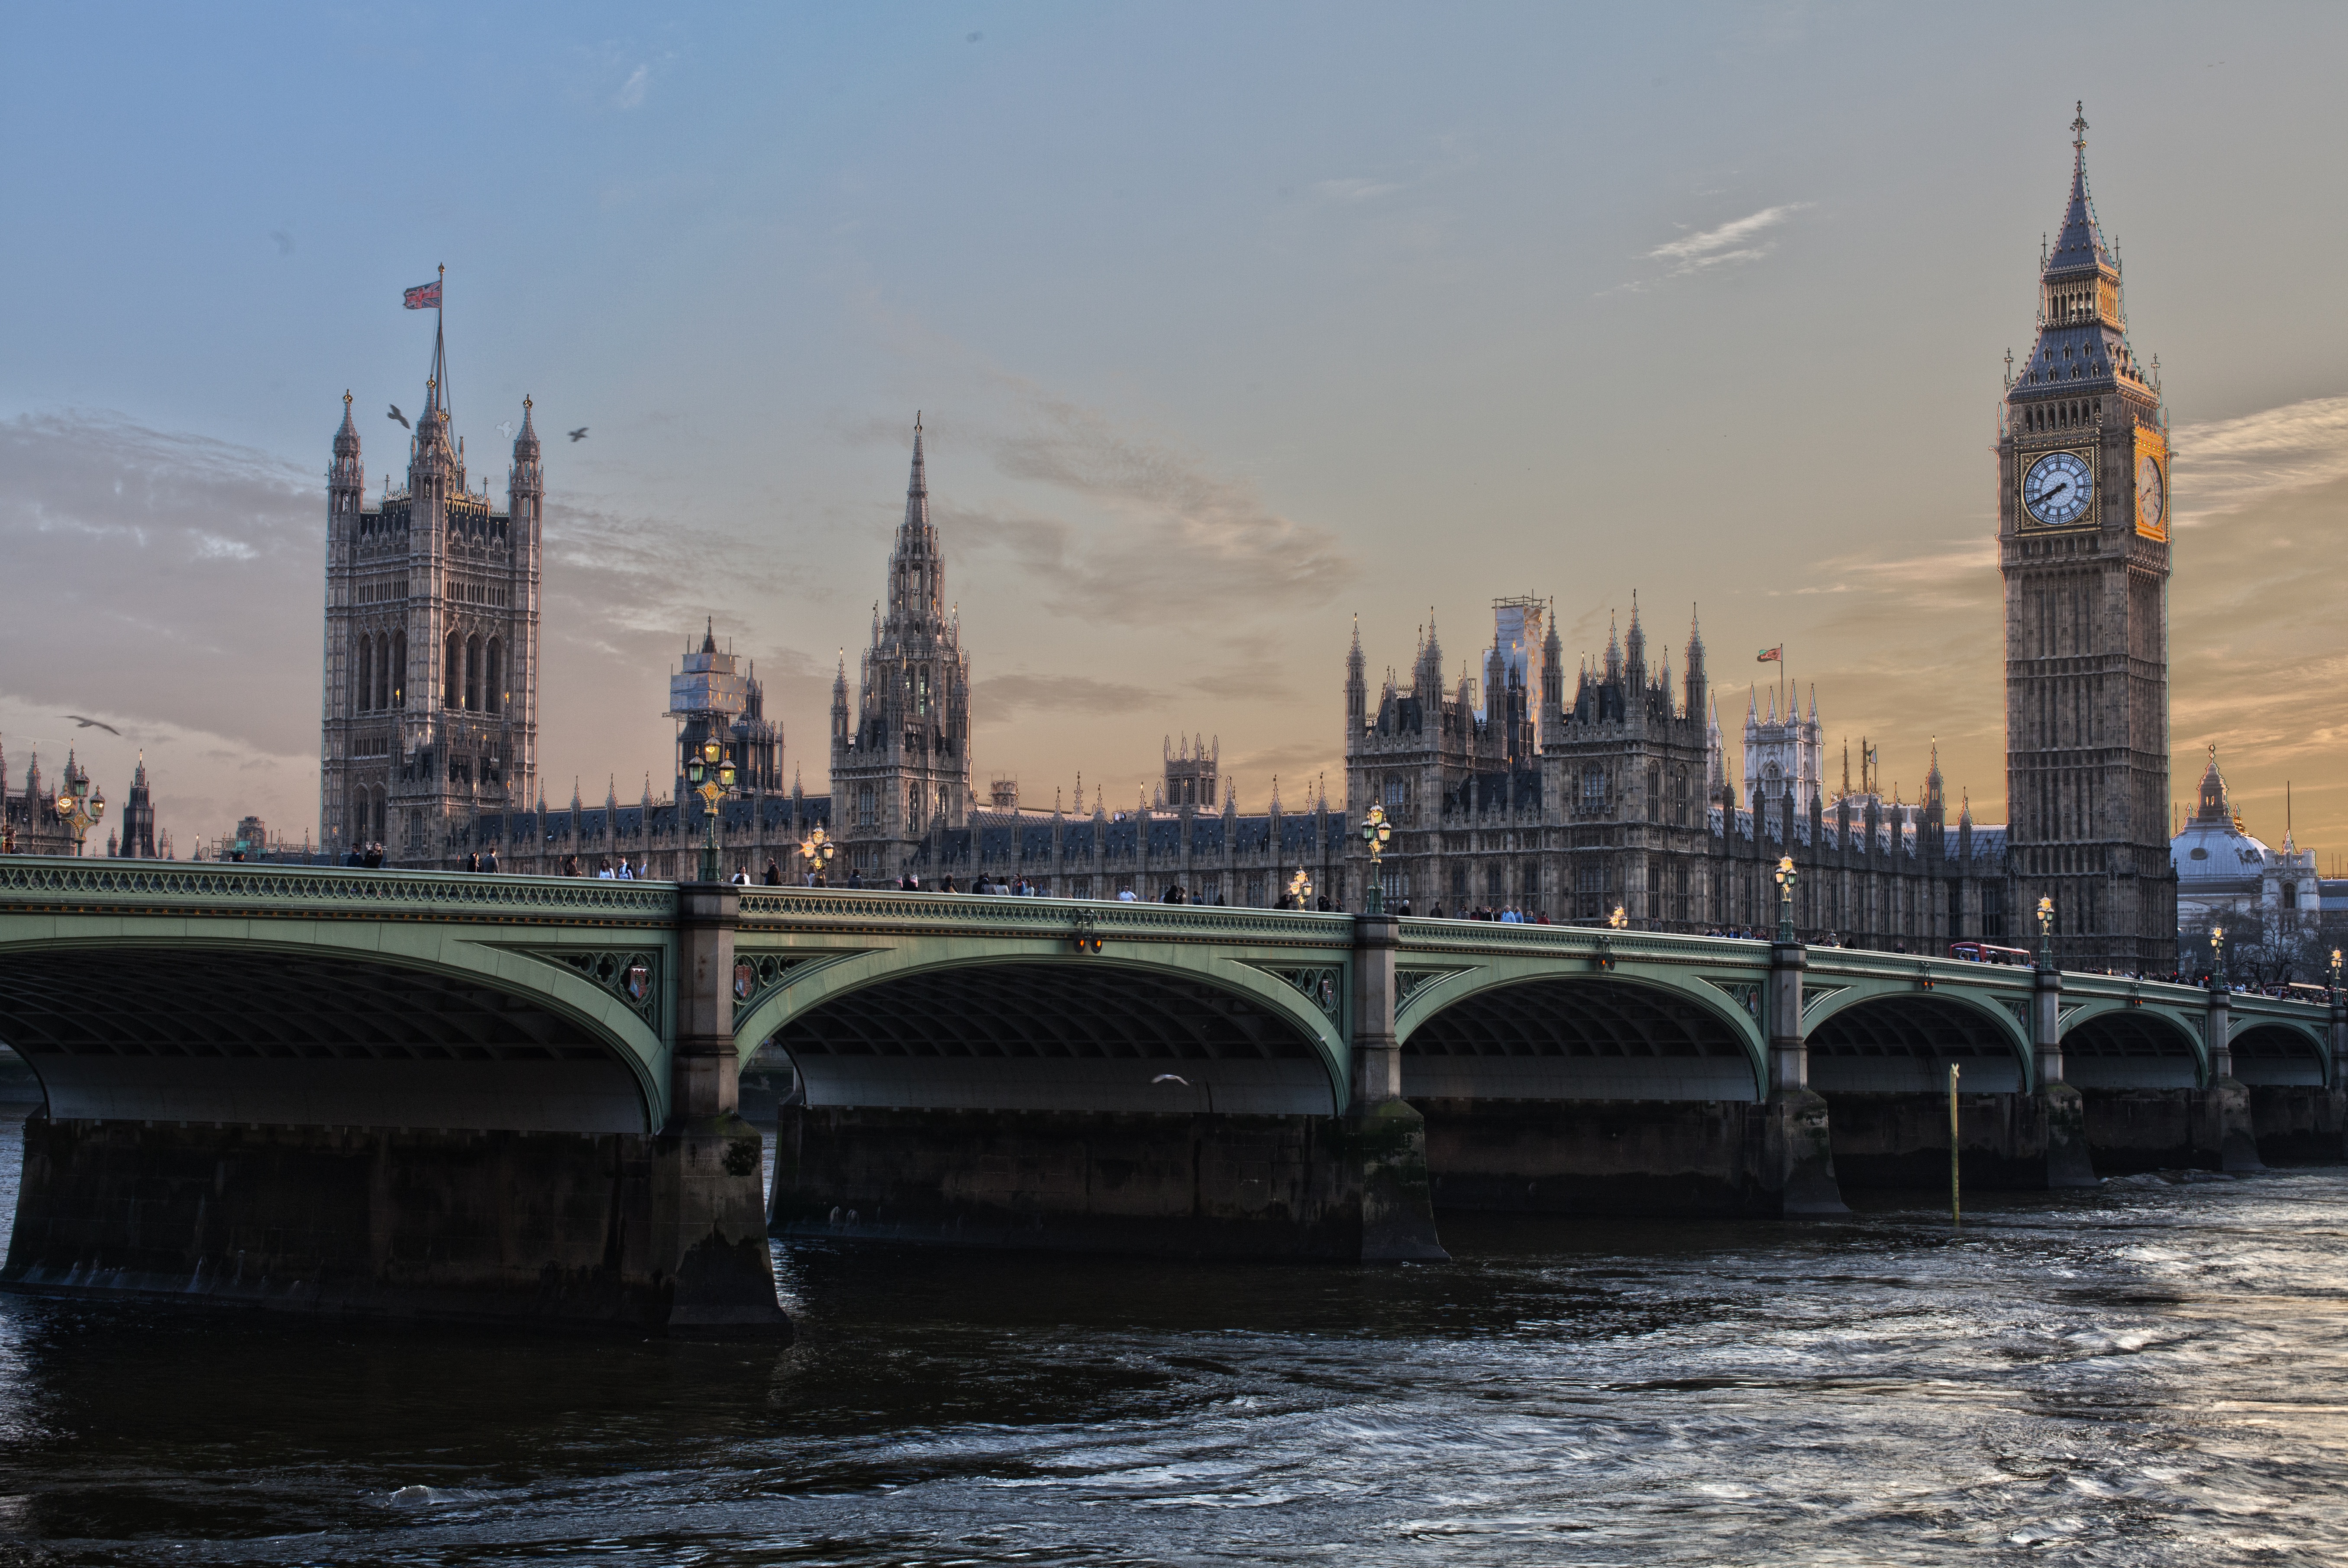 Palace of Westminster: Houses of Parliament and Big Ben in London